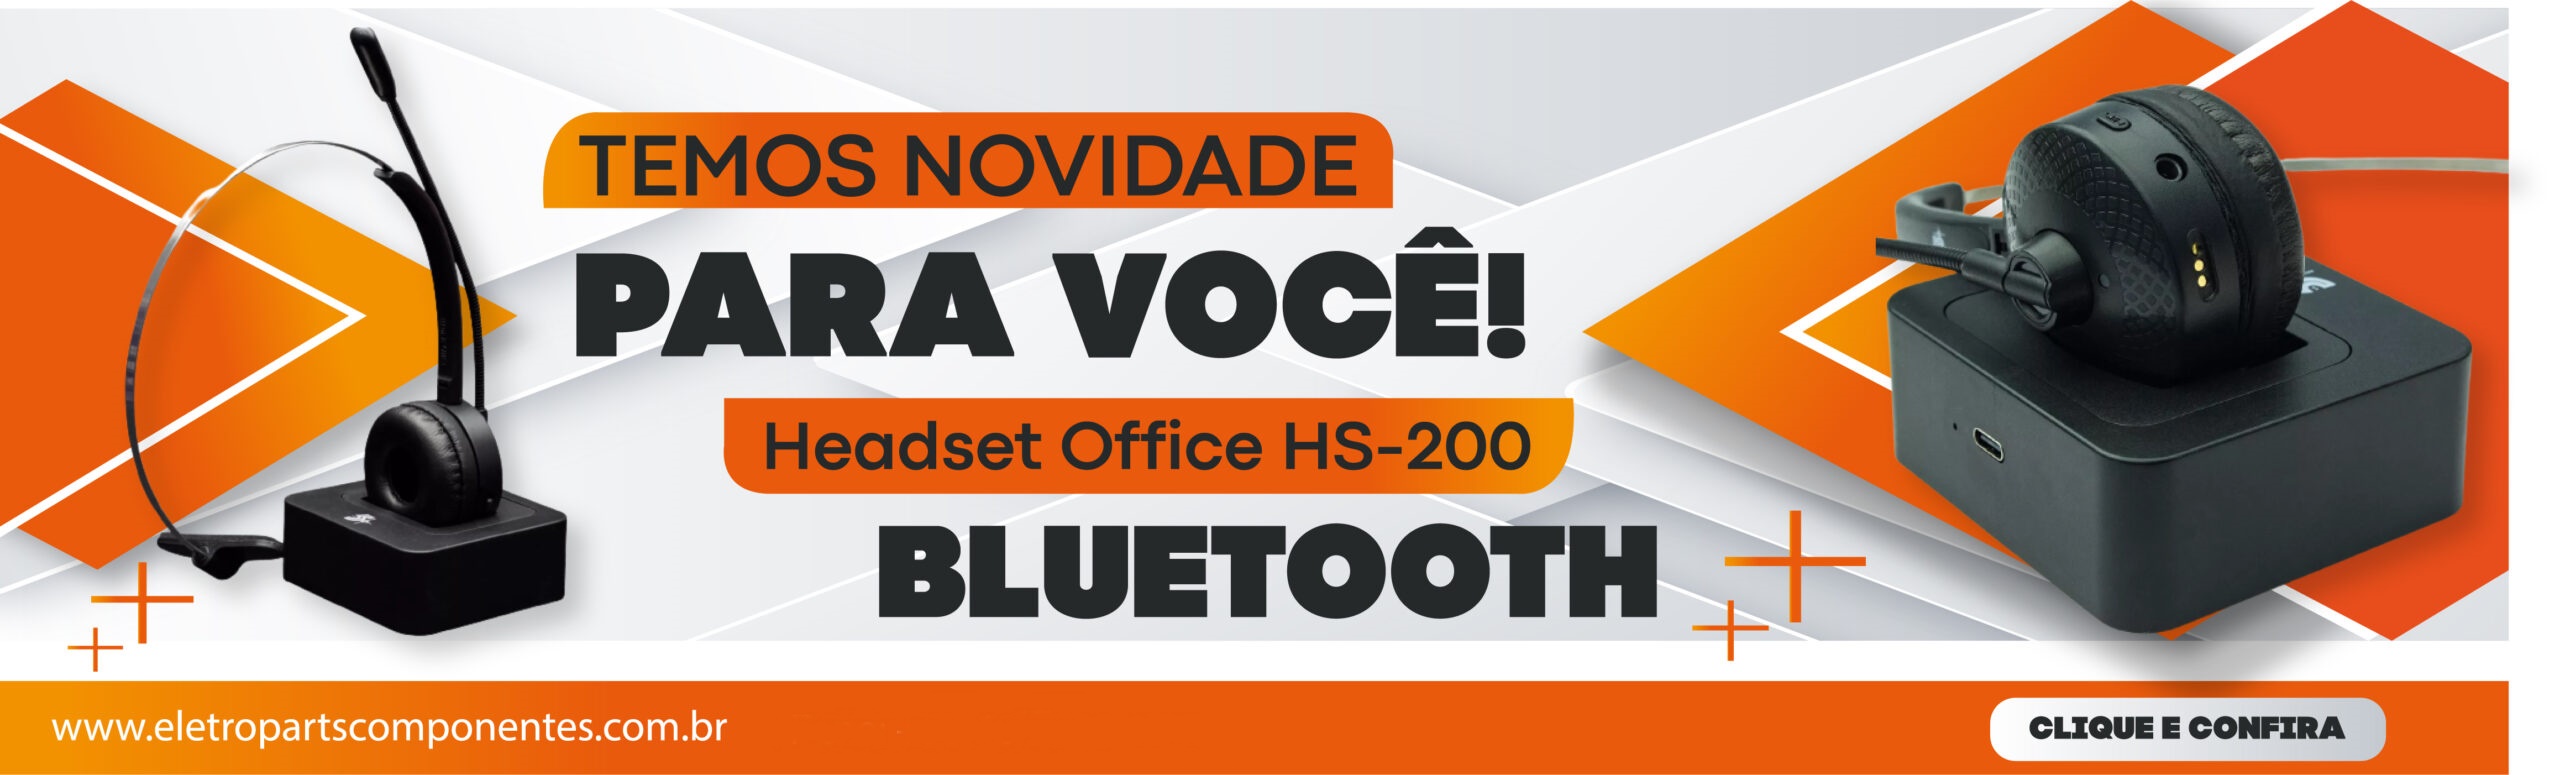 Headset-Office-Bluetooth-HS-200-scaled